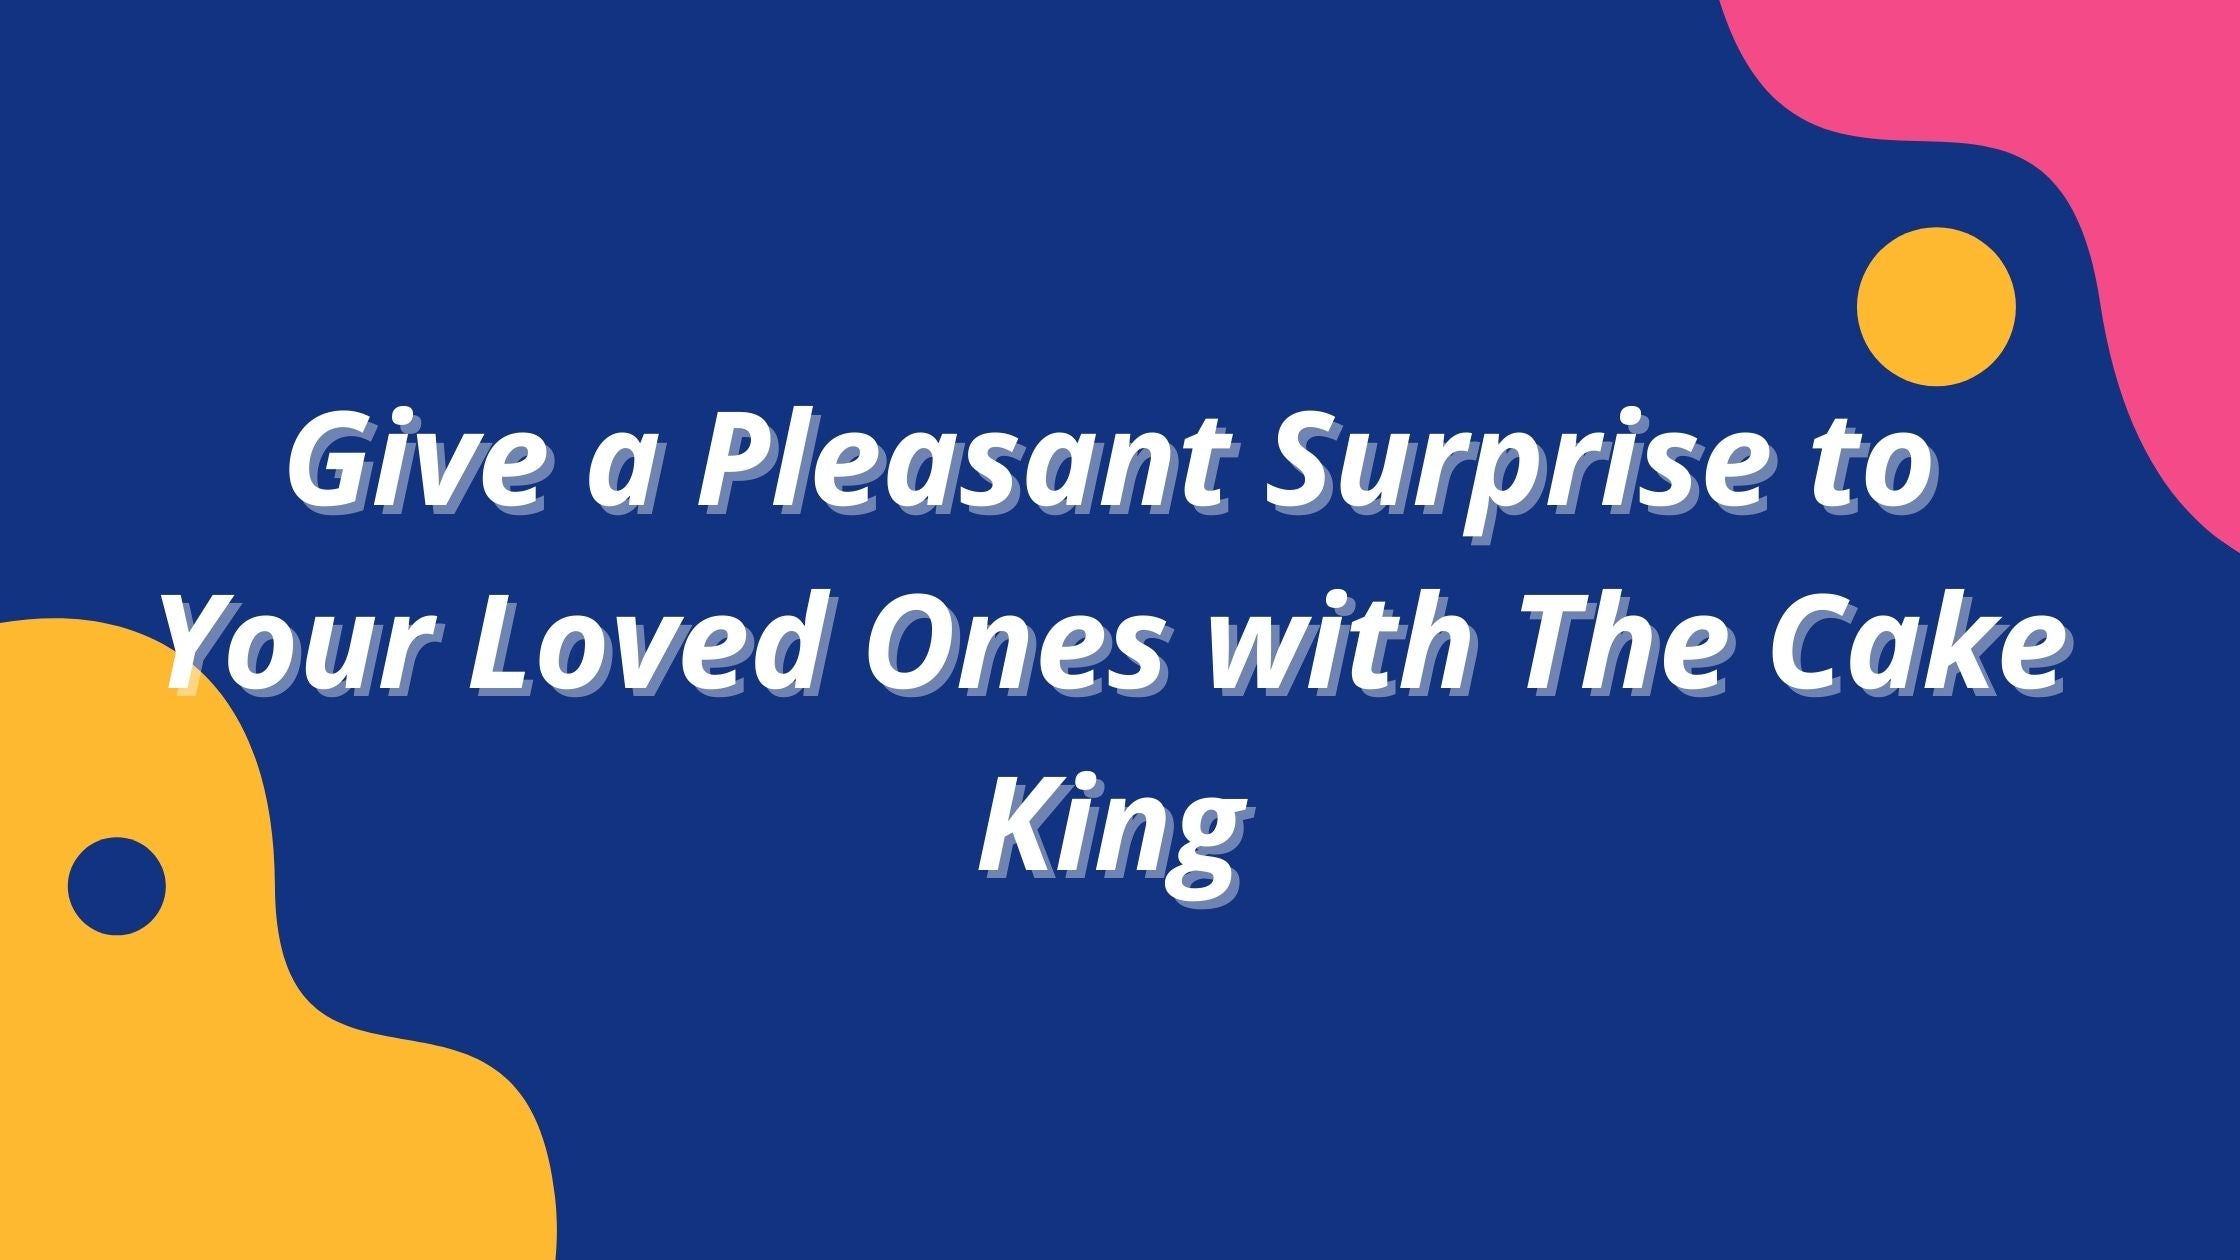 Give a Pleasant Surprise to Your Loved Ones with The Cake King